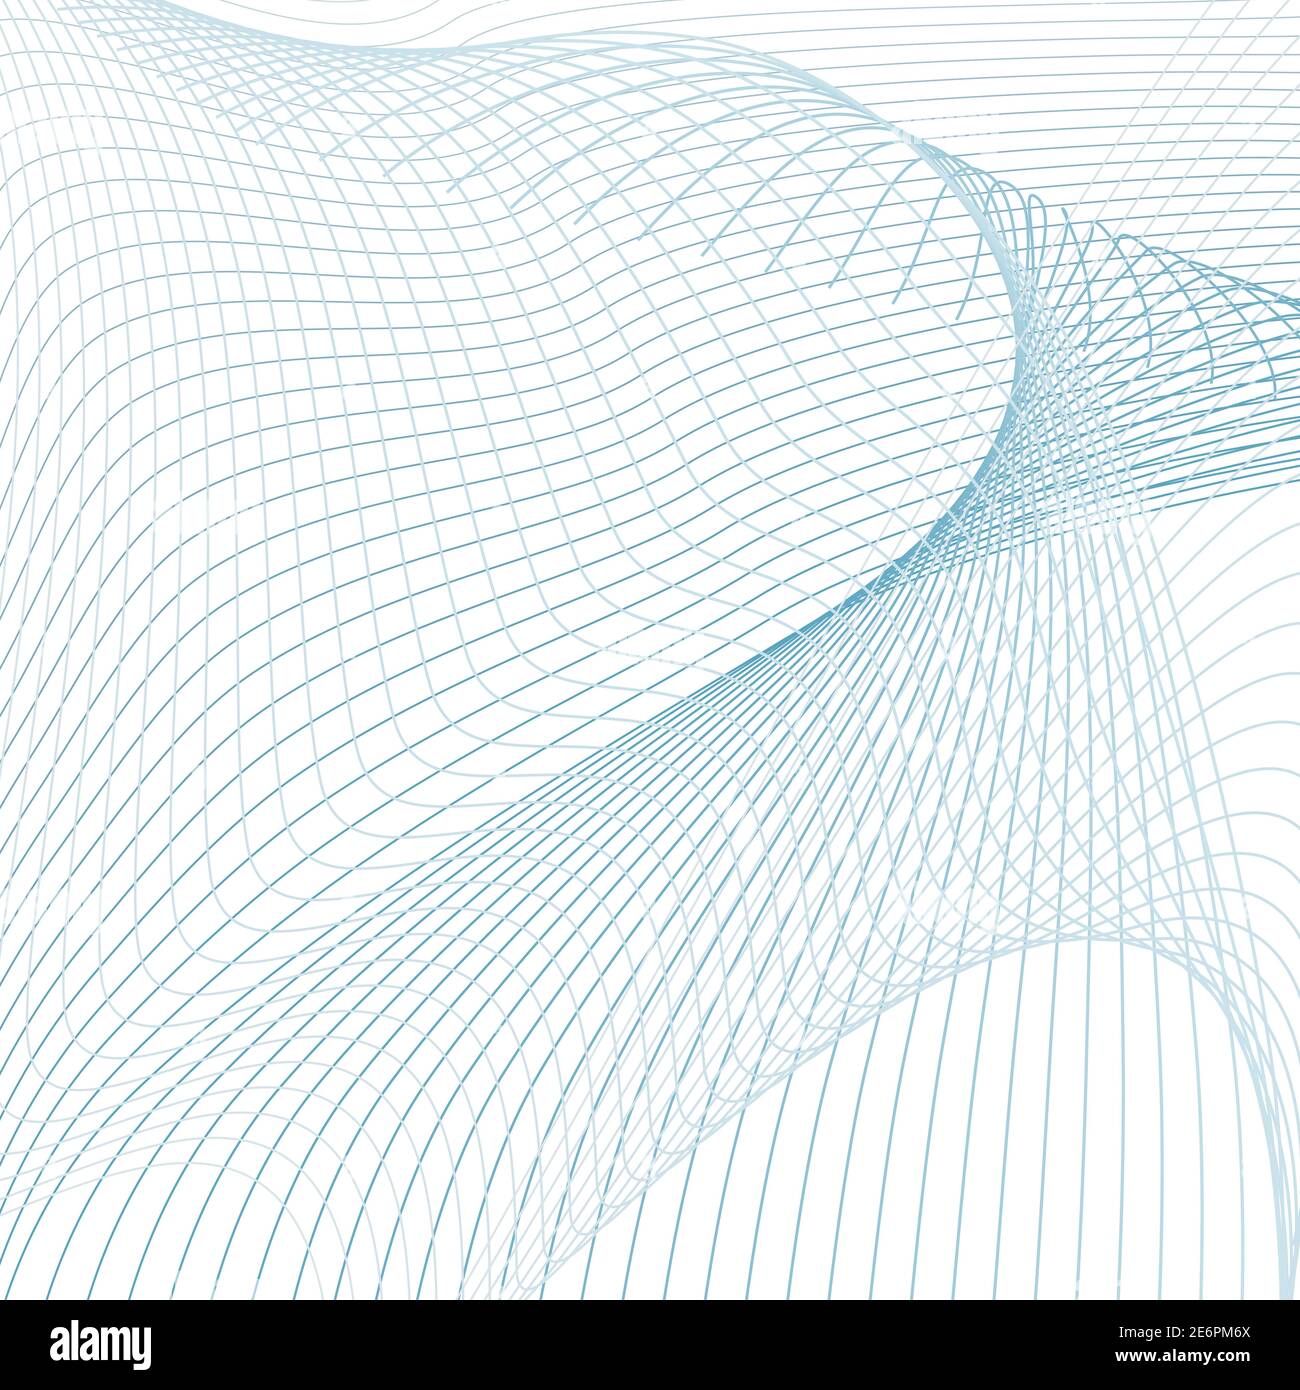 Abstract technology design. Blue, gray curves. Vector line art futuristic pattern. Sound, radio waves. Energy, power concept. White background. EPS10 Stock Vector